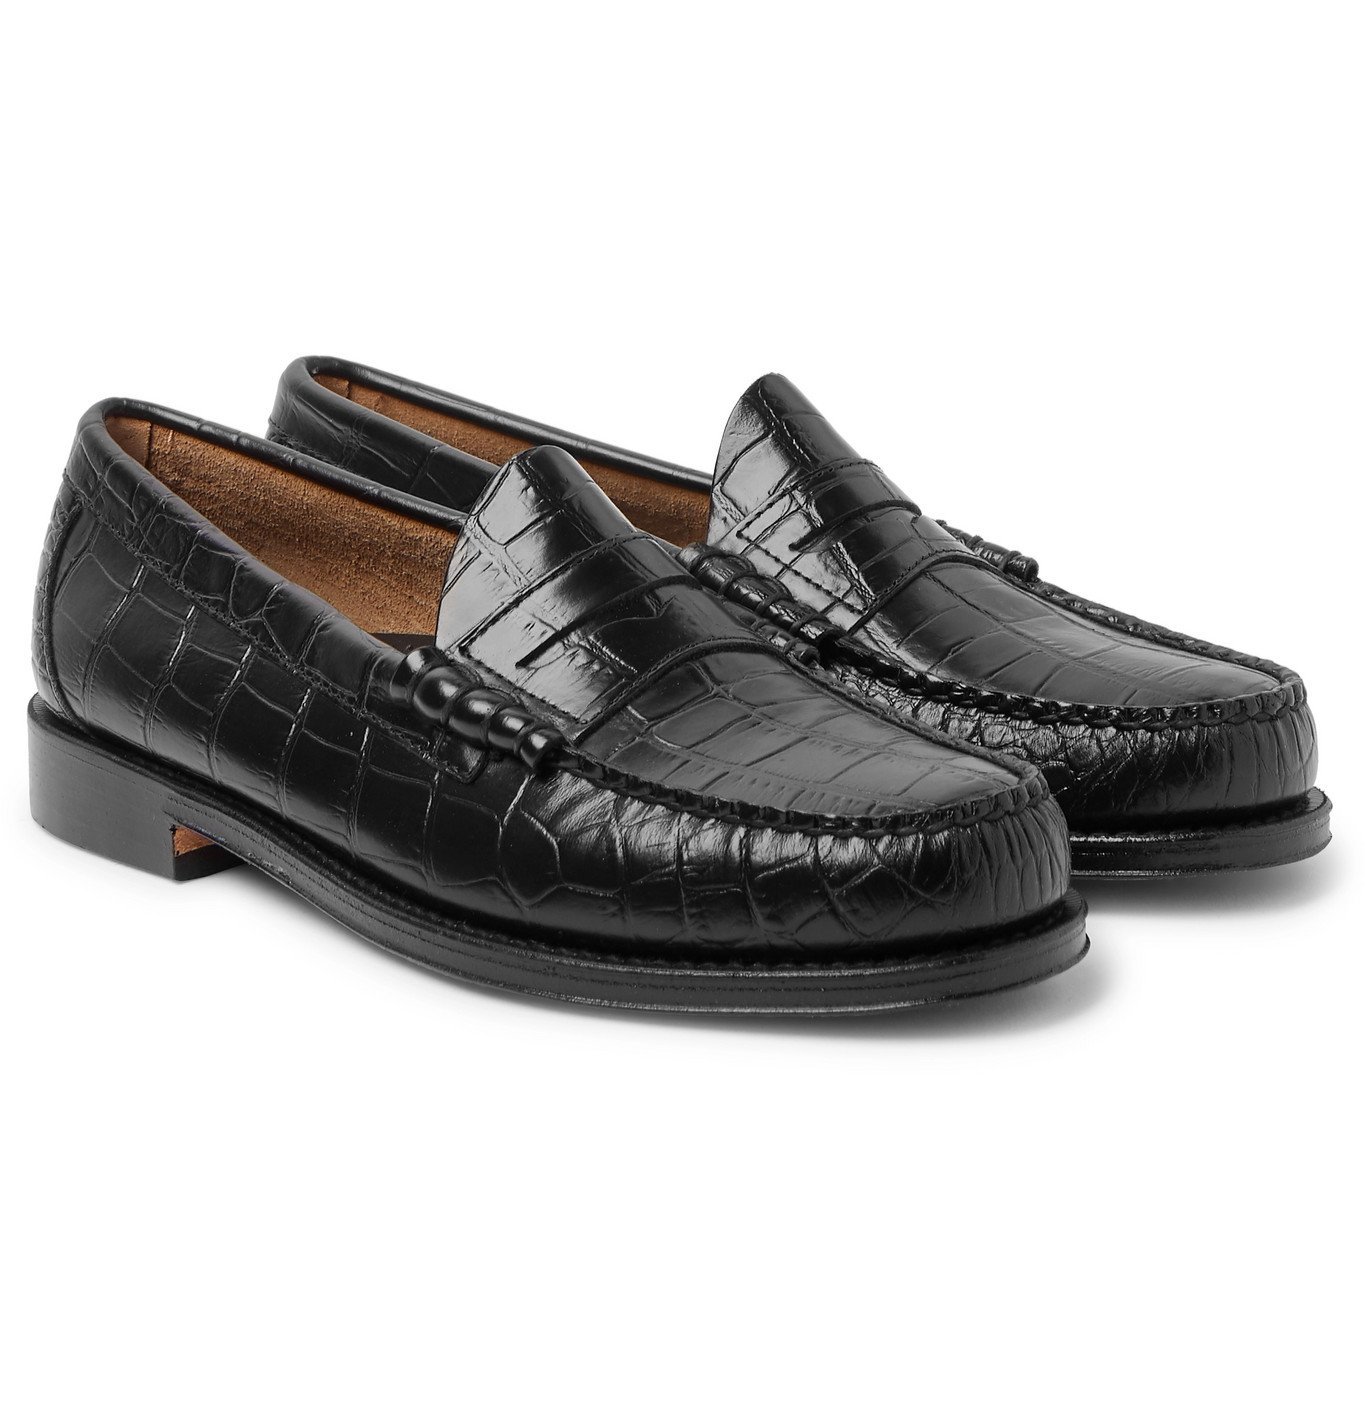 croc penny loafers